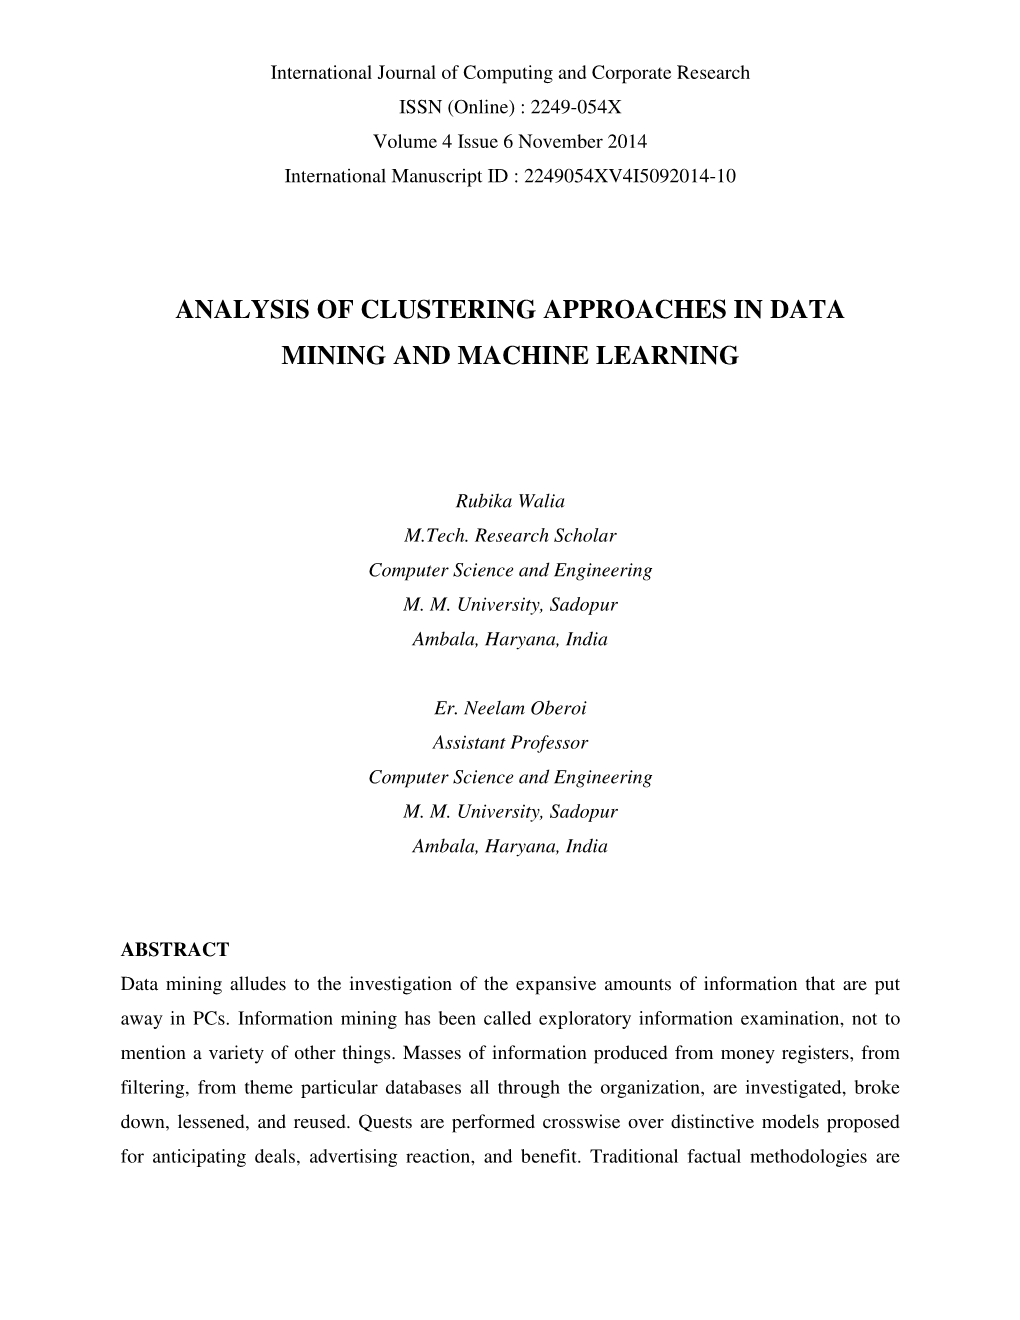 Analysis of Clustering Approaches in Data Mining and Machine Learning